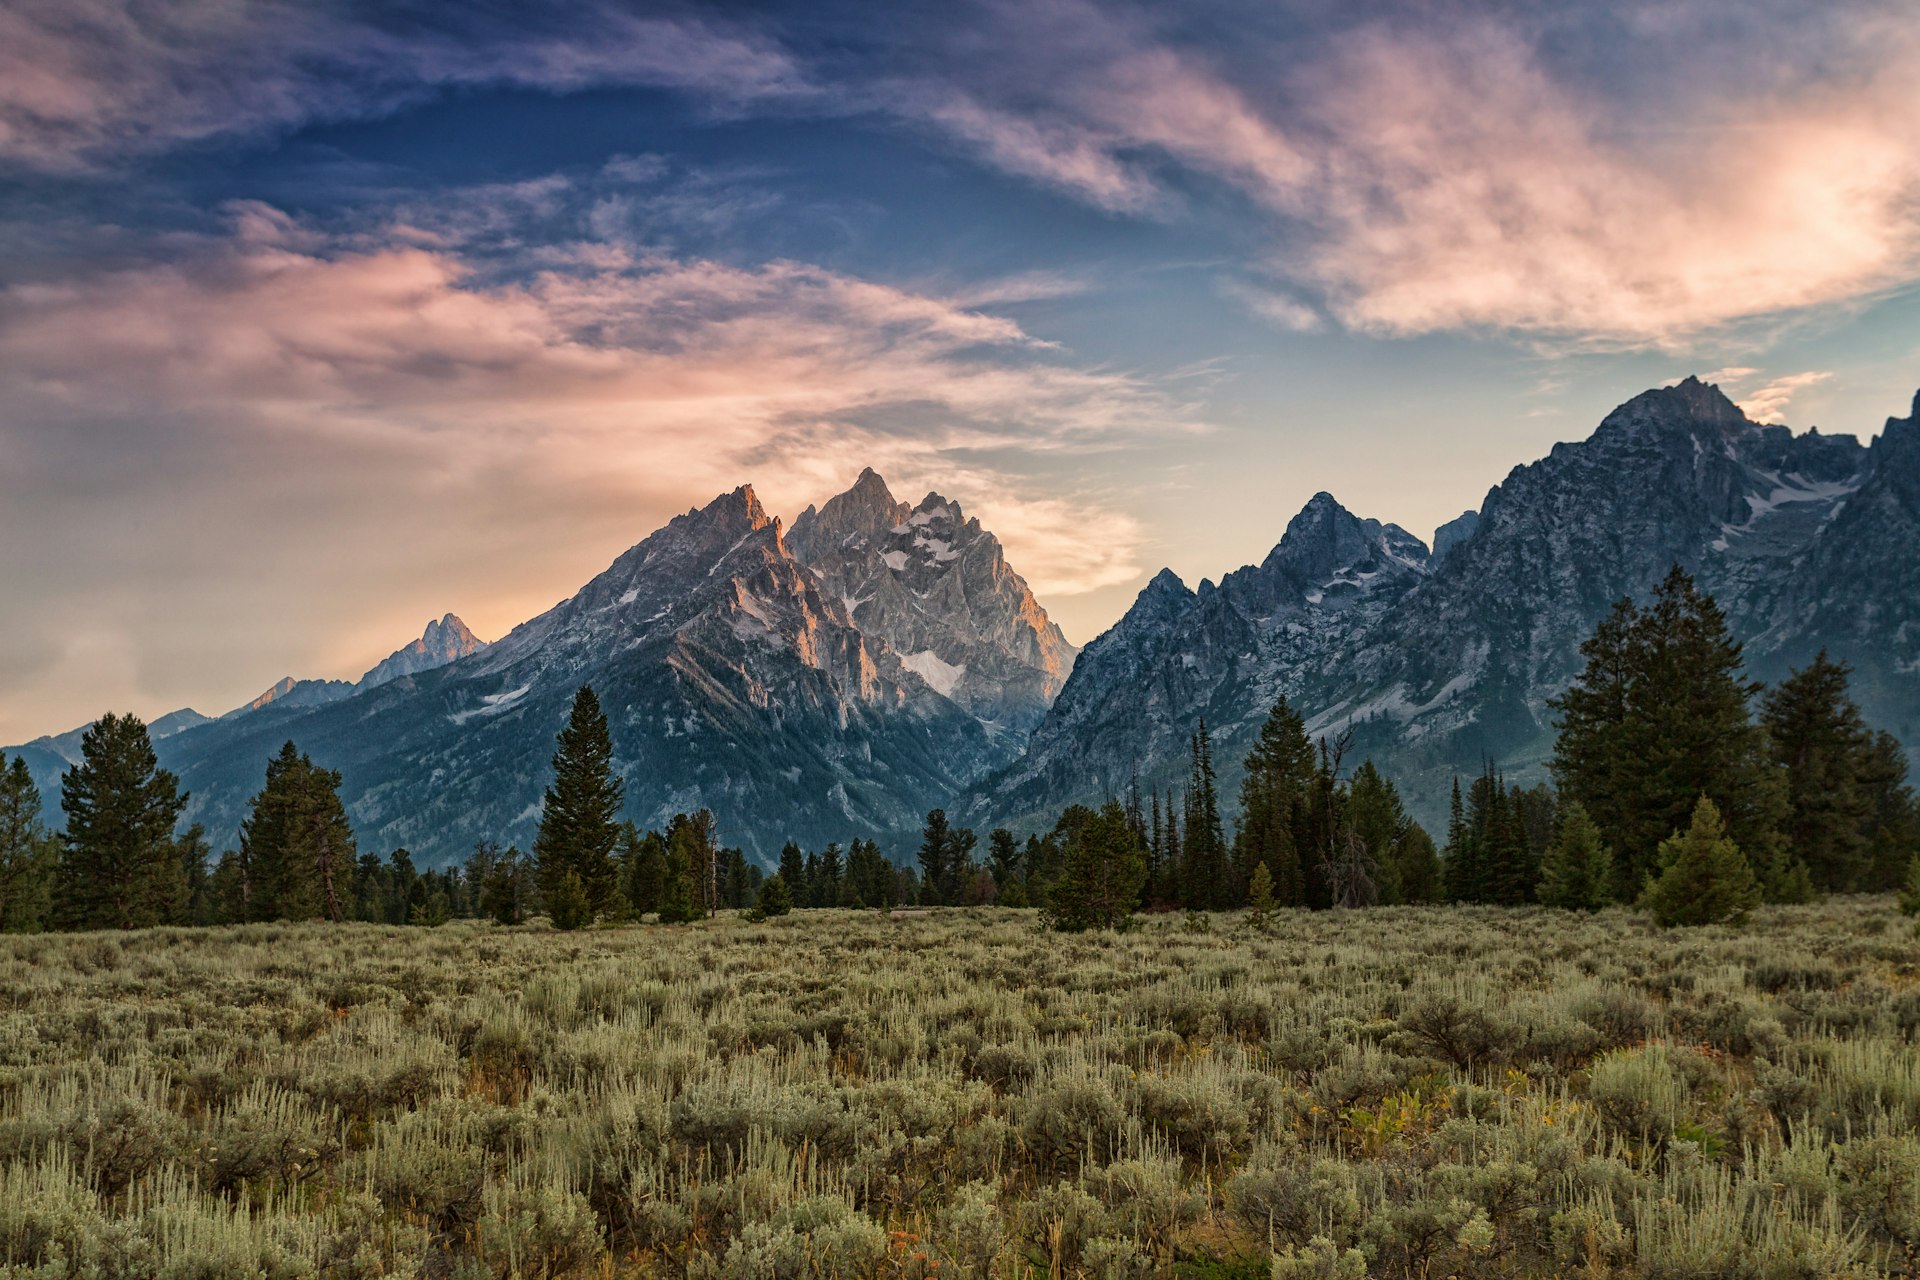 500px Photo ID: 116299579 - Sun mixed with clouds and smoke make for a colorful sunset in Grand Teton National Park